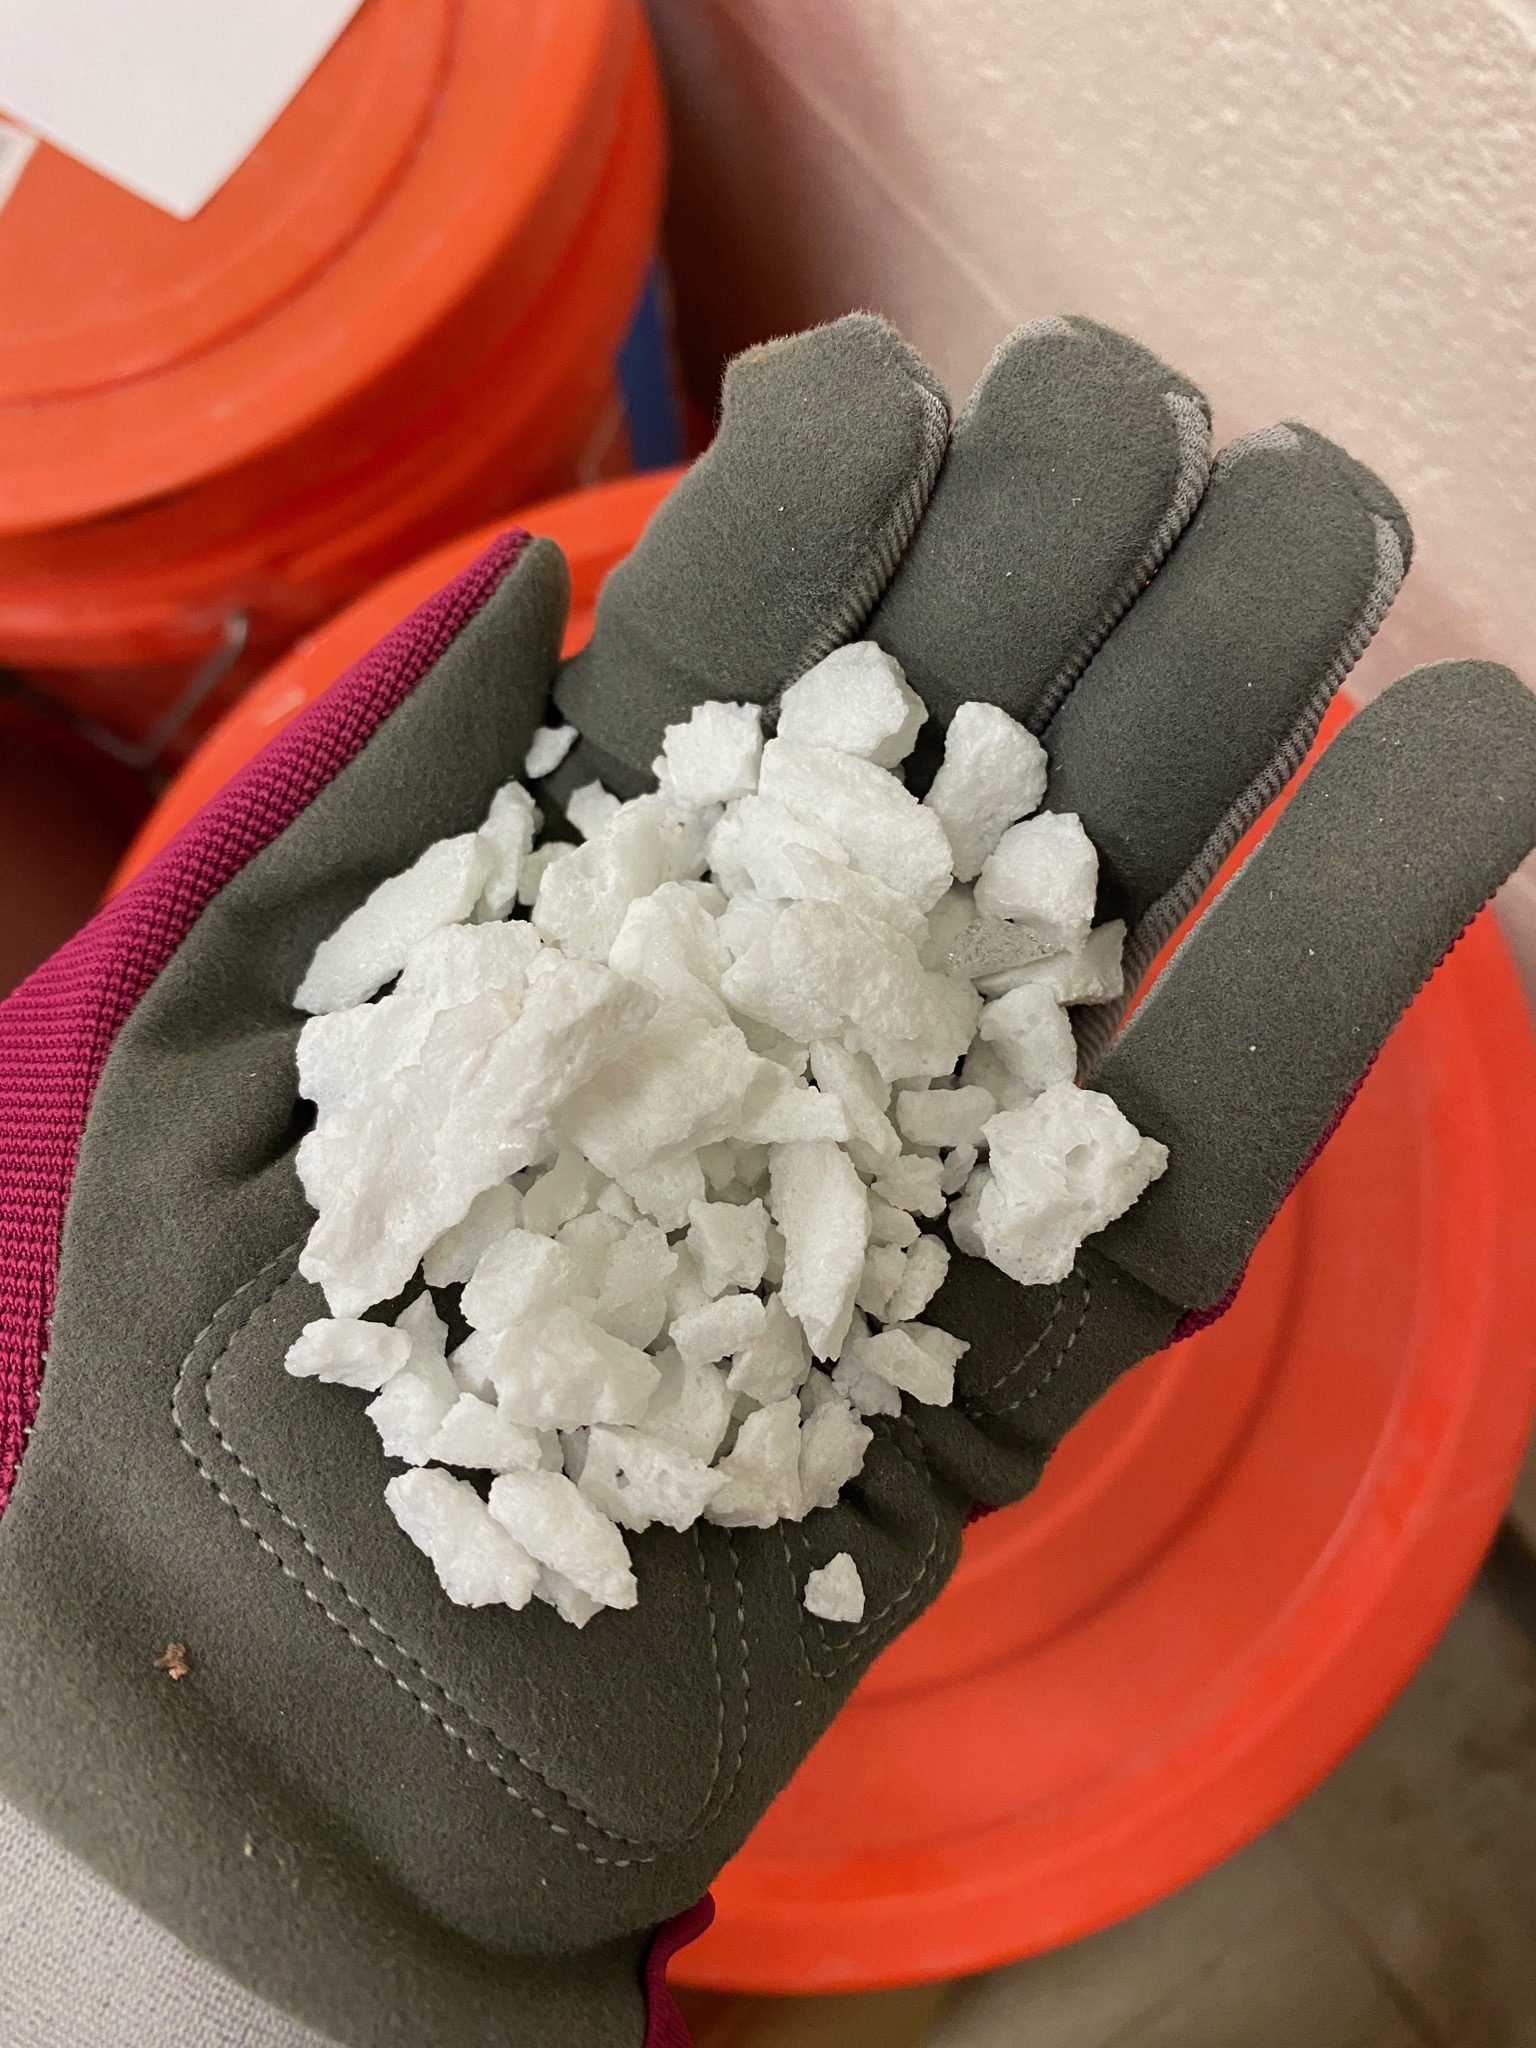 A gloved hand holds a handful of white looking synthetic minerals over a orange bucket.